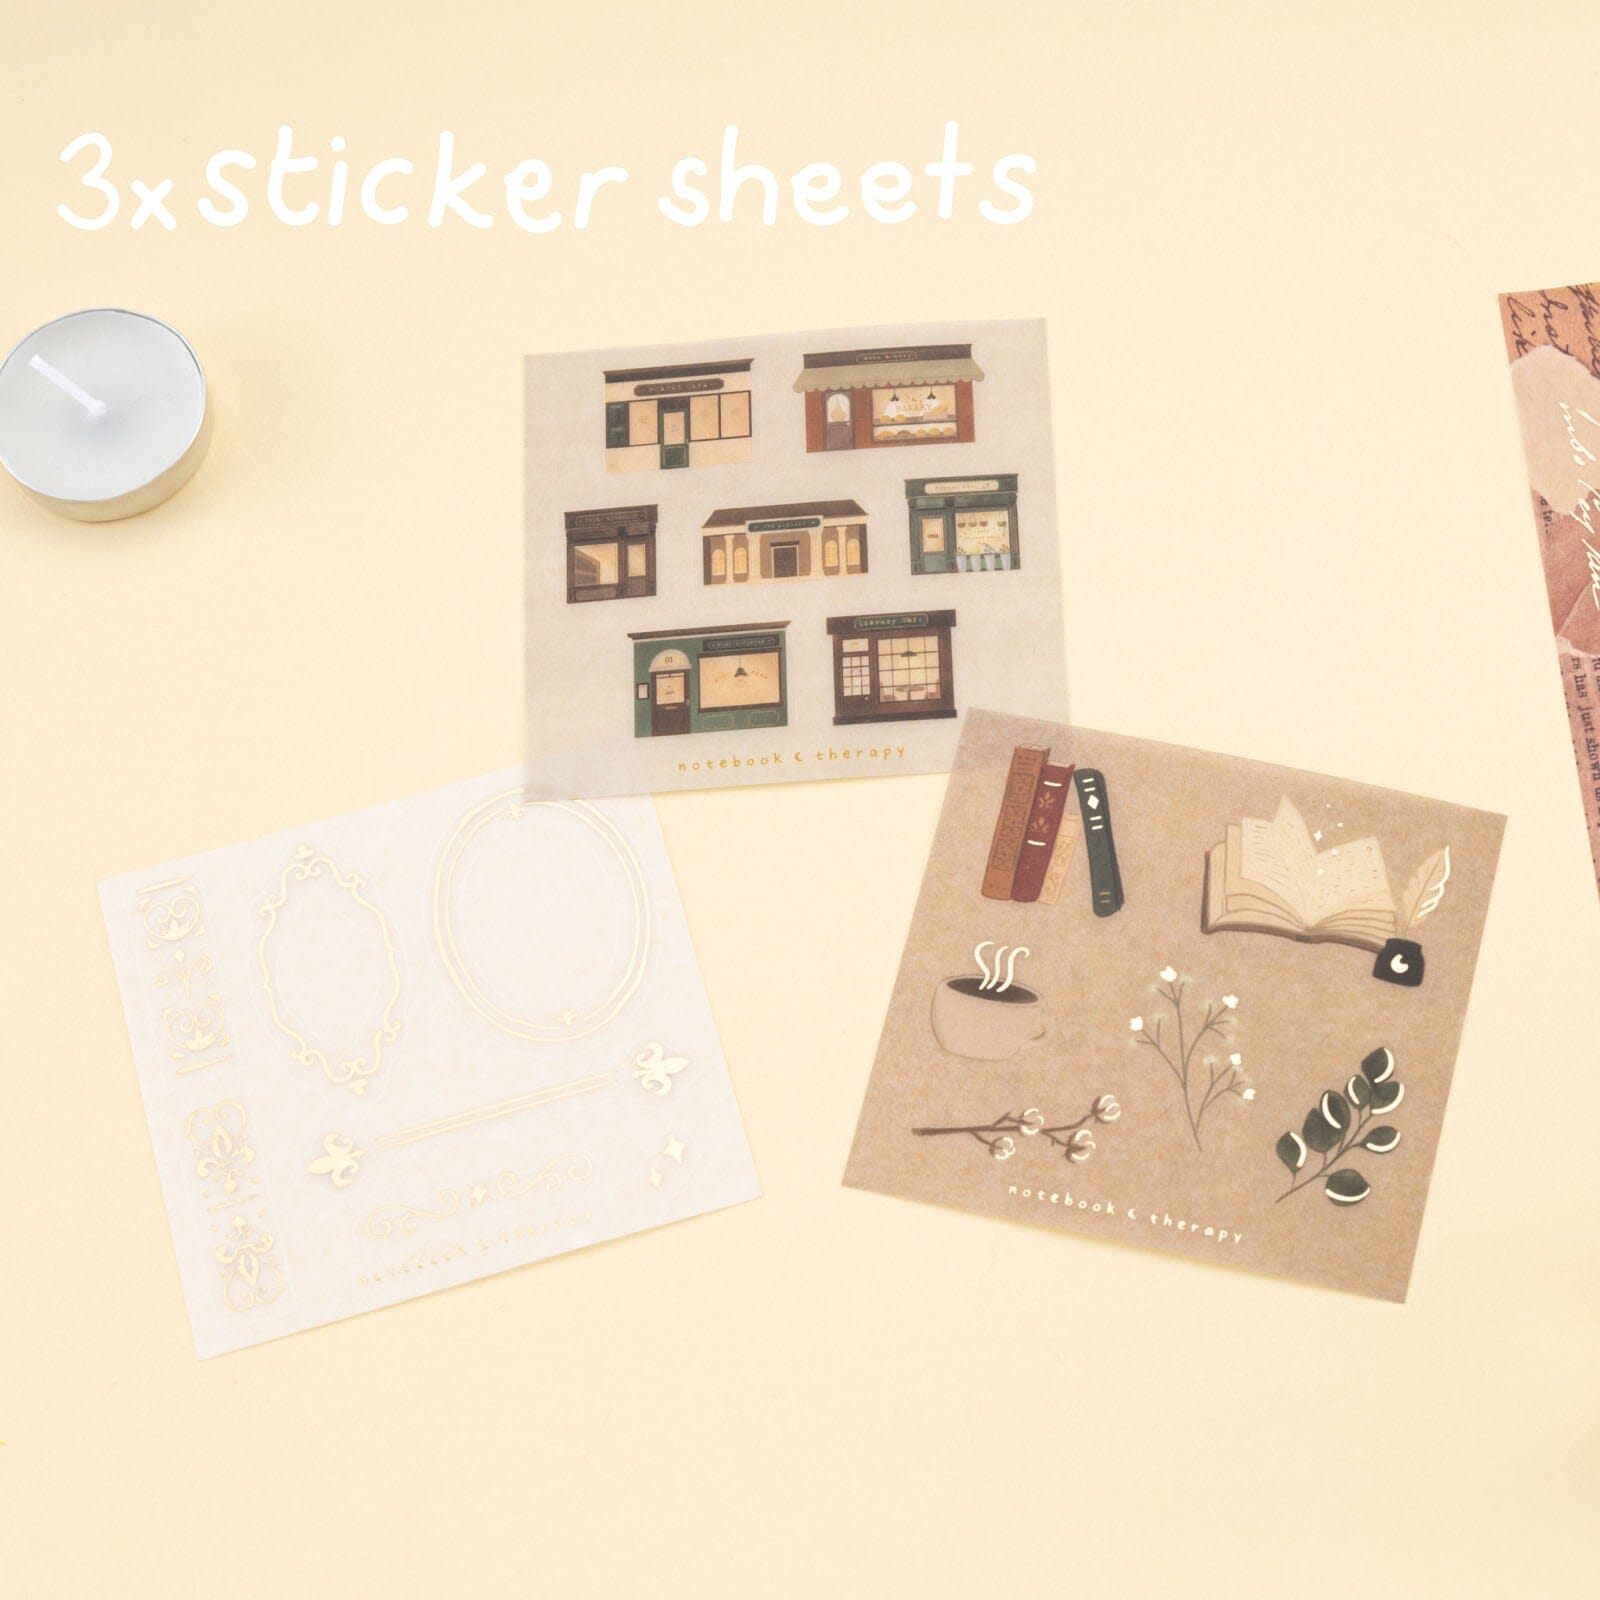 3x sticker sheets with gold foil details and book style illustrations